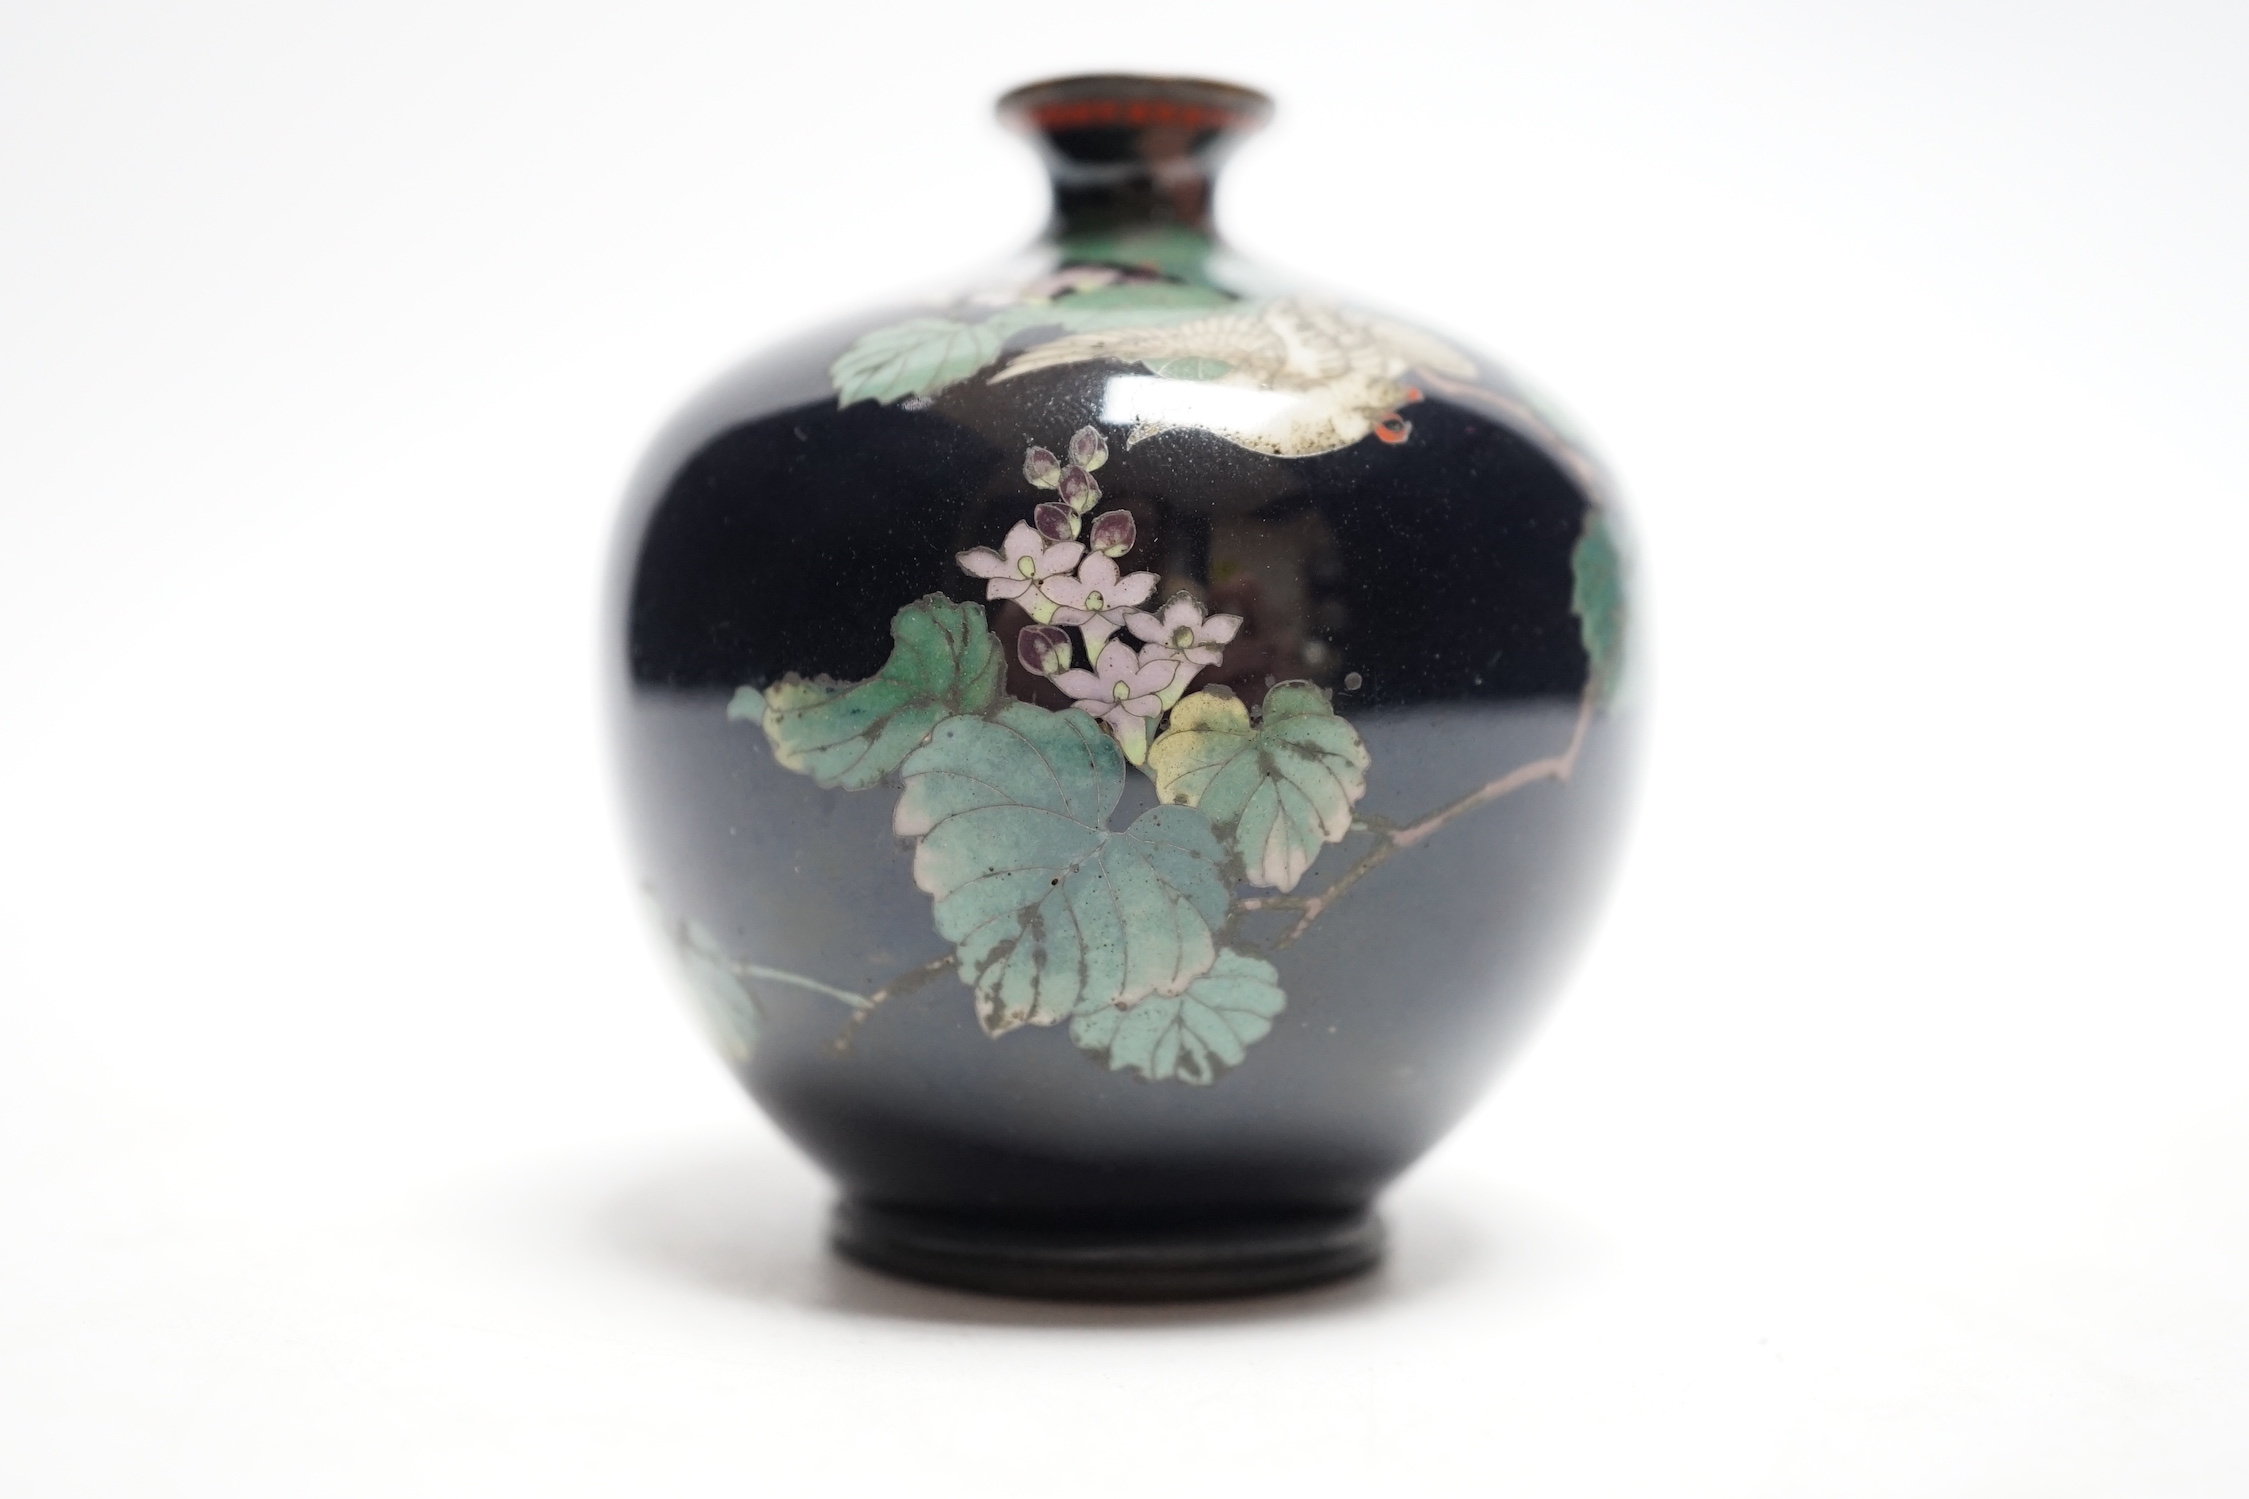 A Japanese silver wire cloisonné enamel miniature globular vase, Meiji period, decorated with a dove amid flowering branches, 6.5cm high